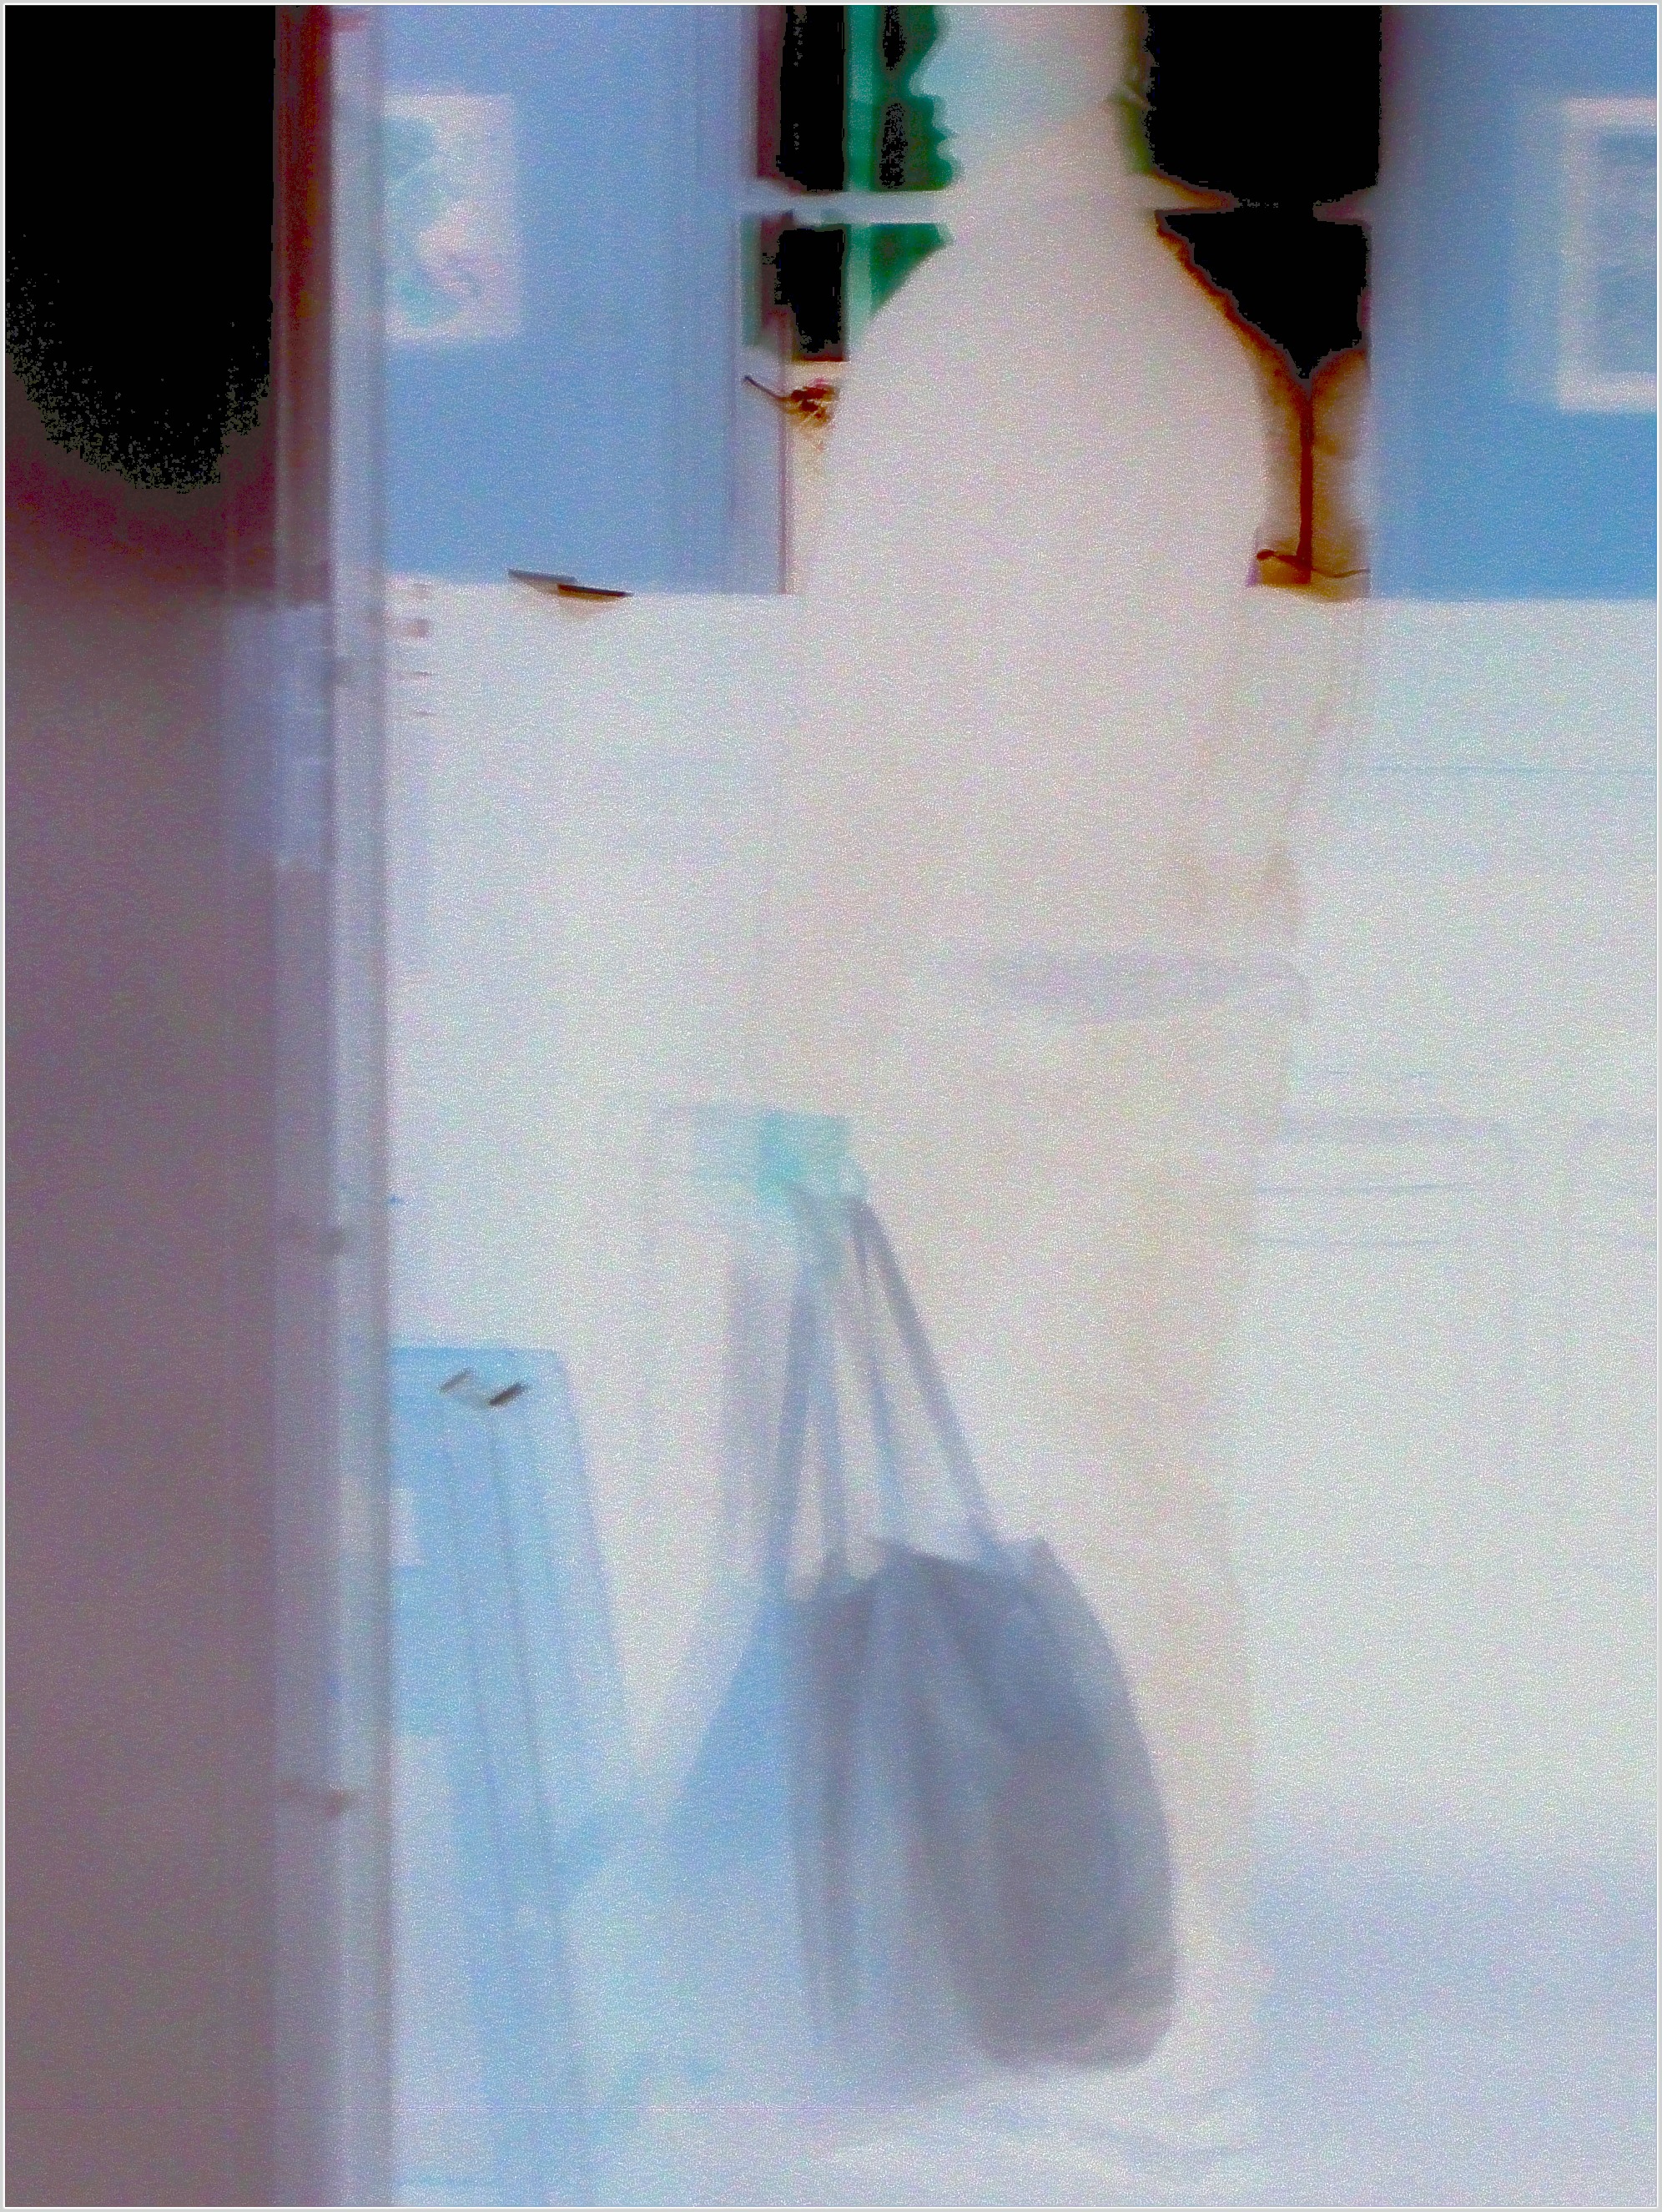 Guy With a Bag Before a Window in a Cafe march 19 2012